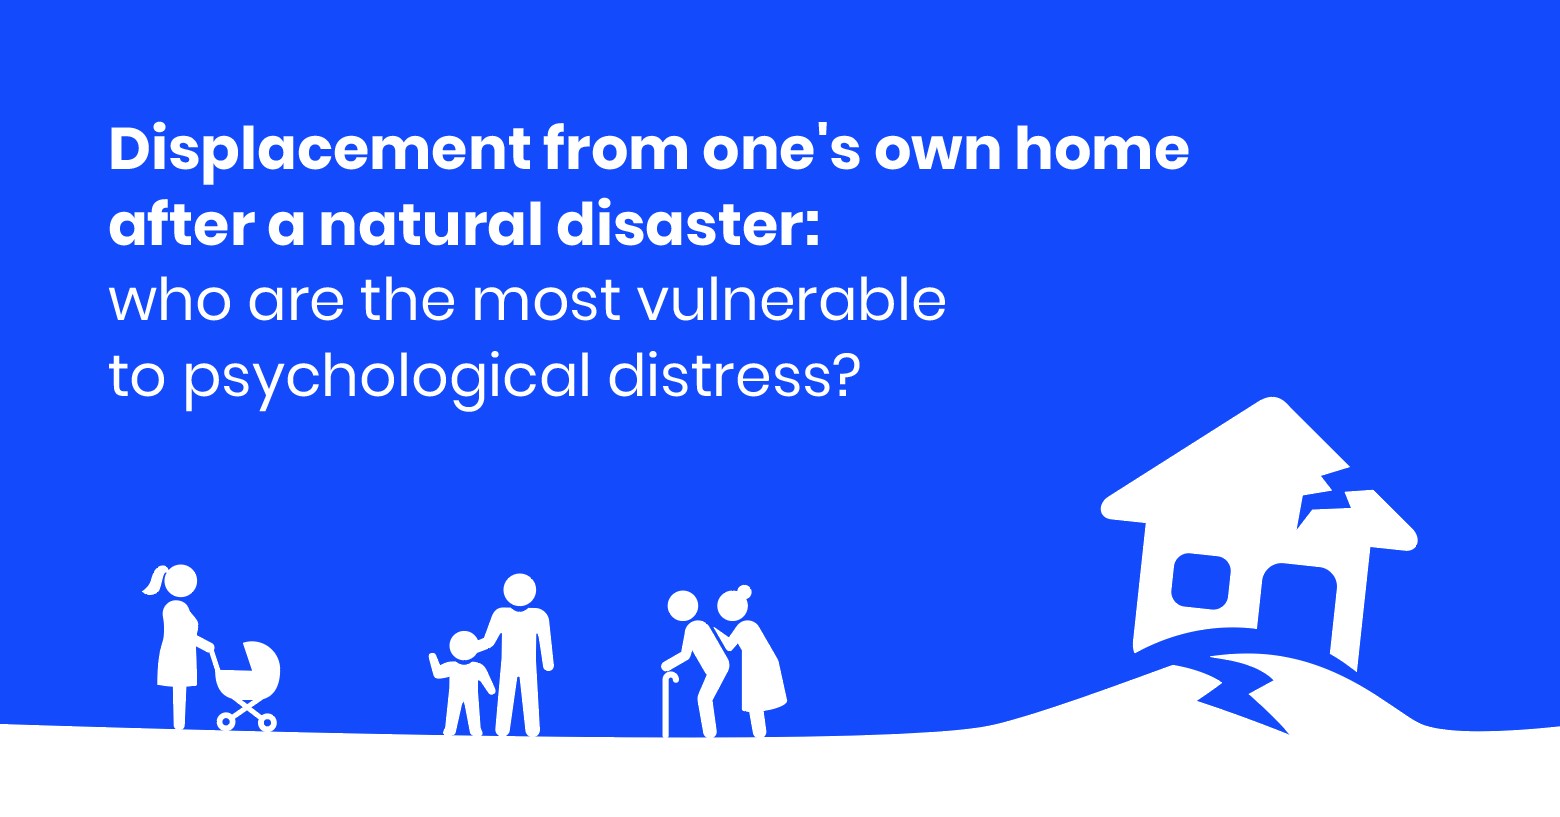 Displacement from one's own home after a natural disaster: who are the most vulnerable to psychological distress?